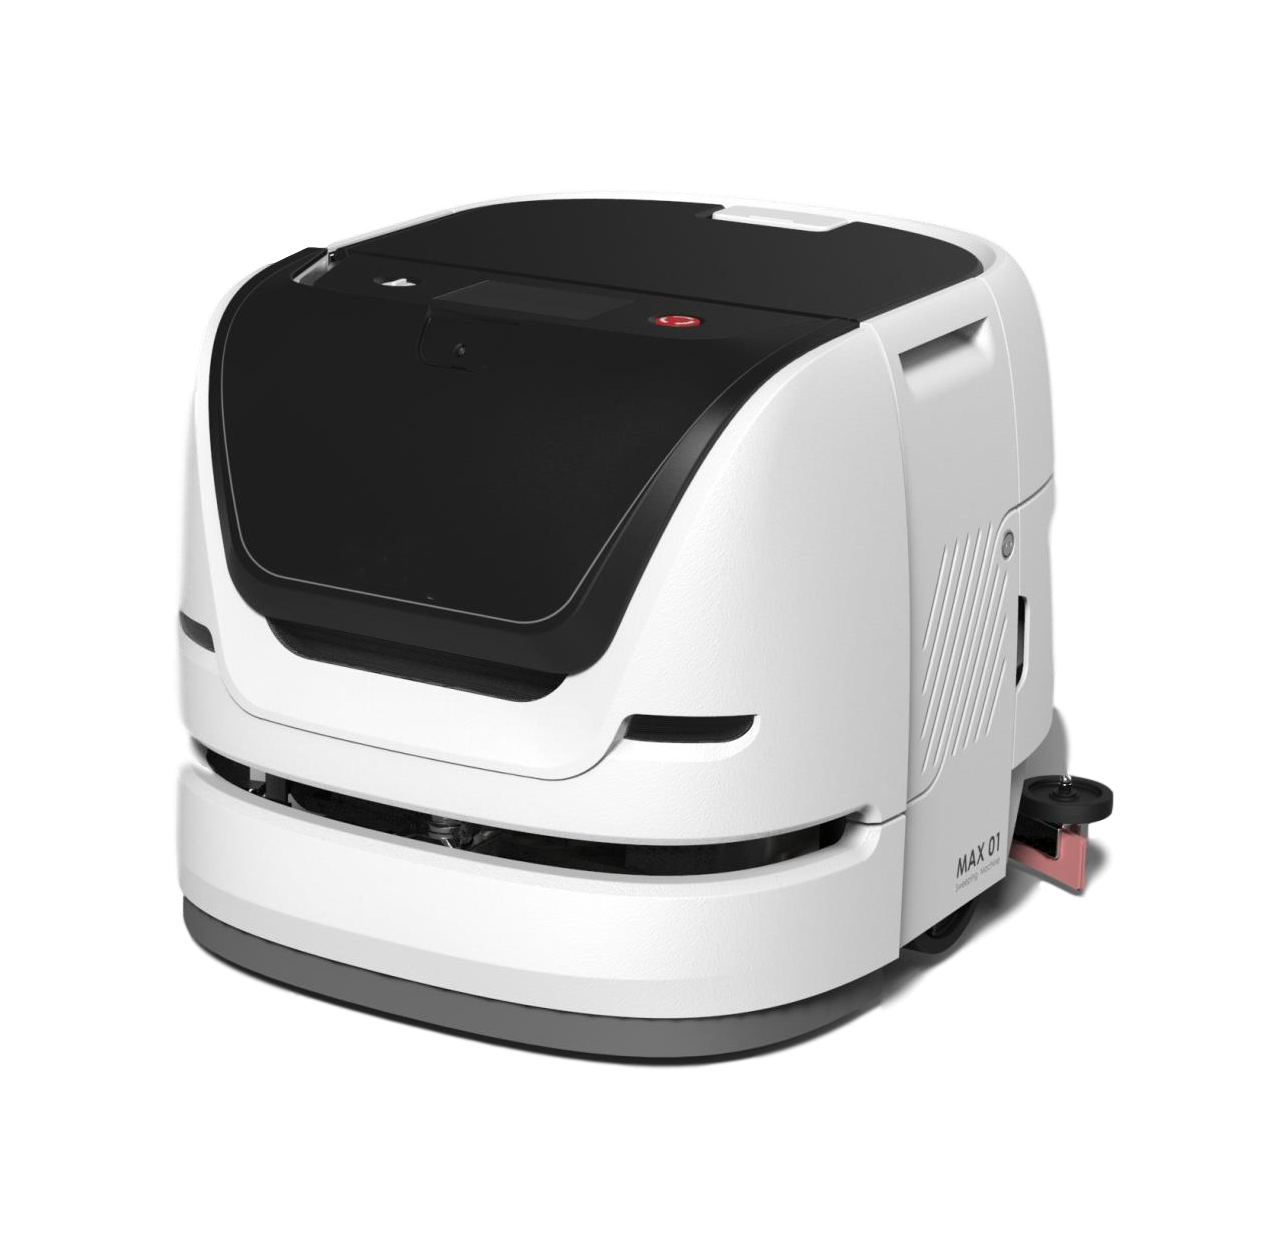 Relativitetsteori Republik dissipation Max Cleaning Robot for Assisted Living